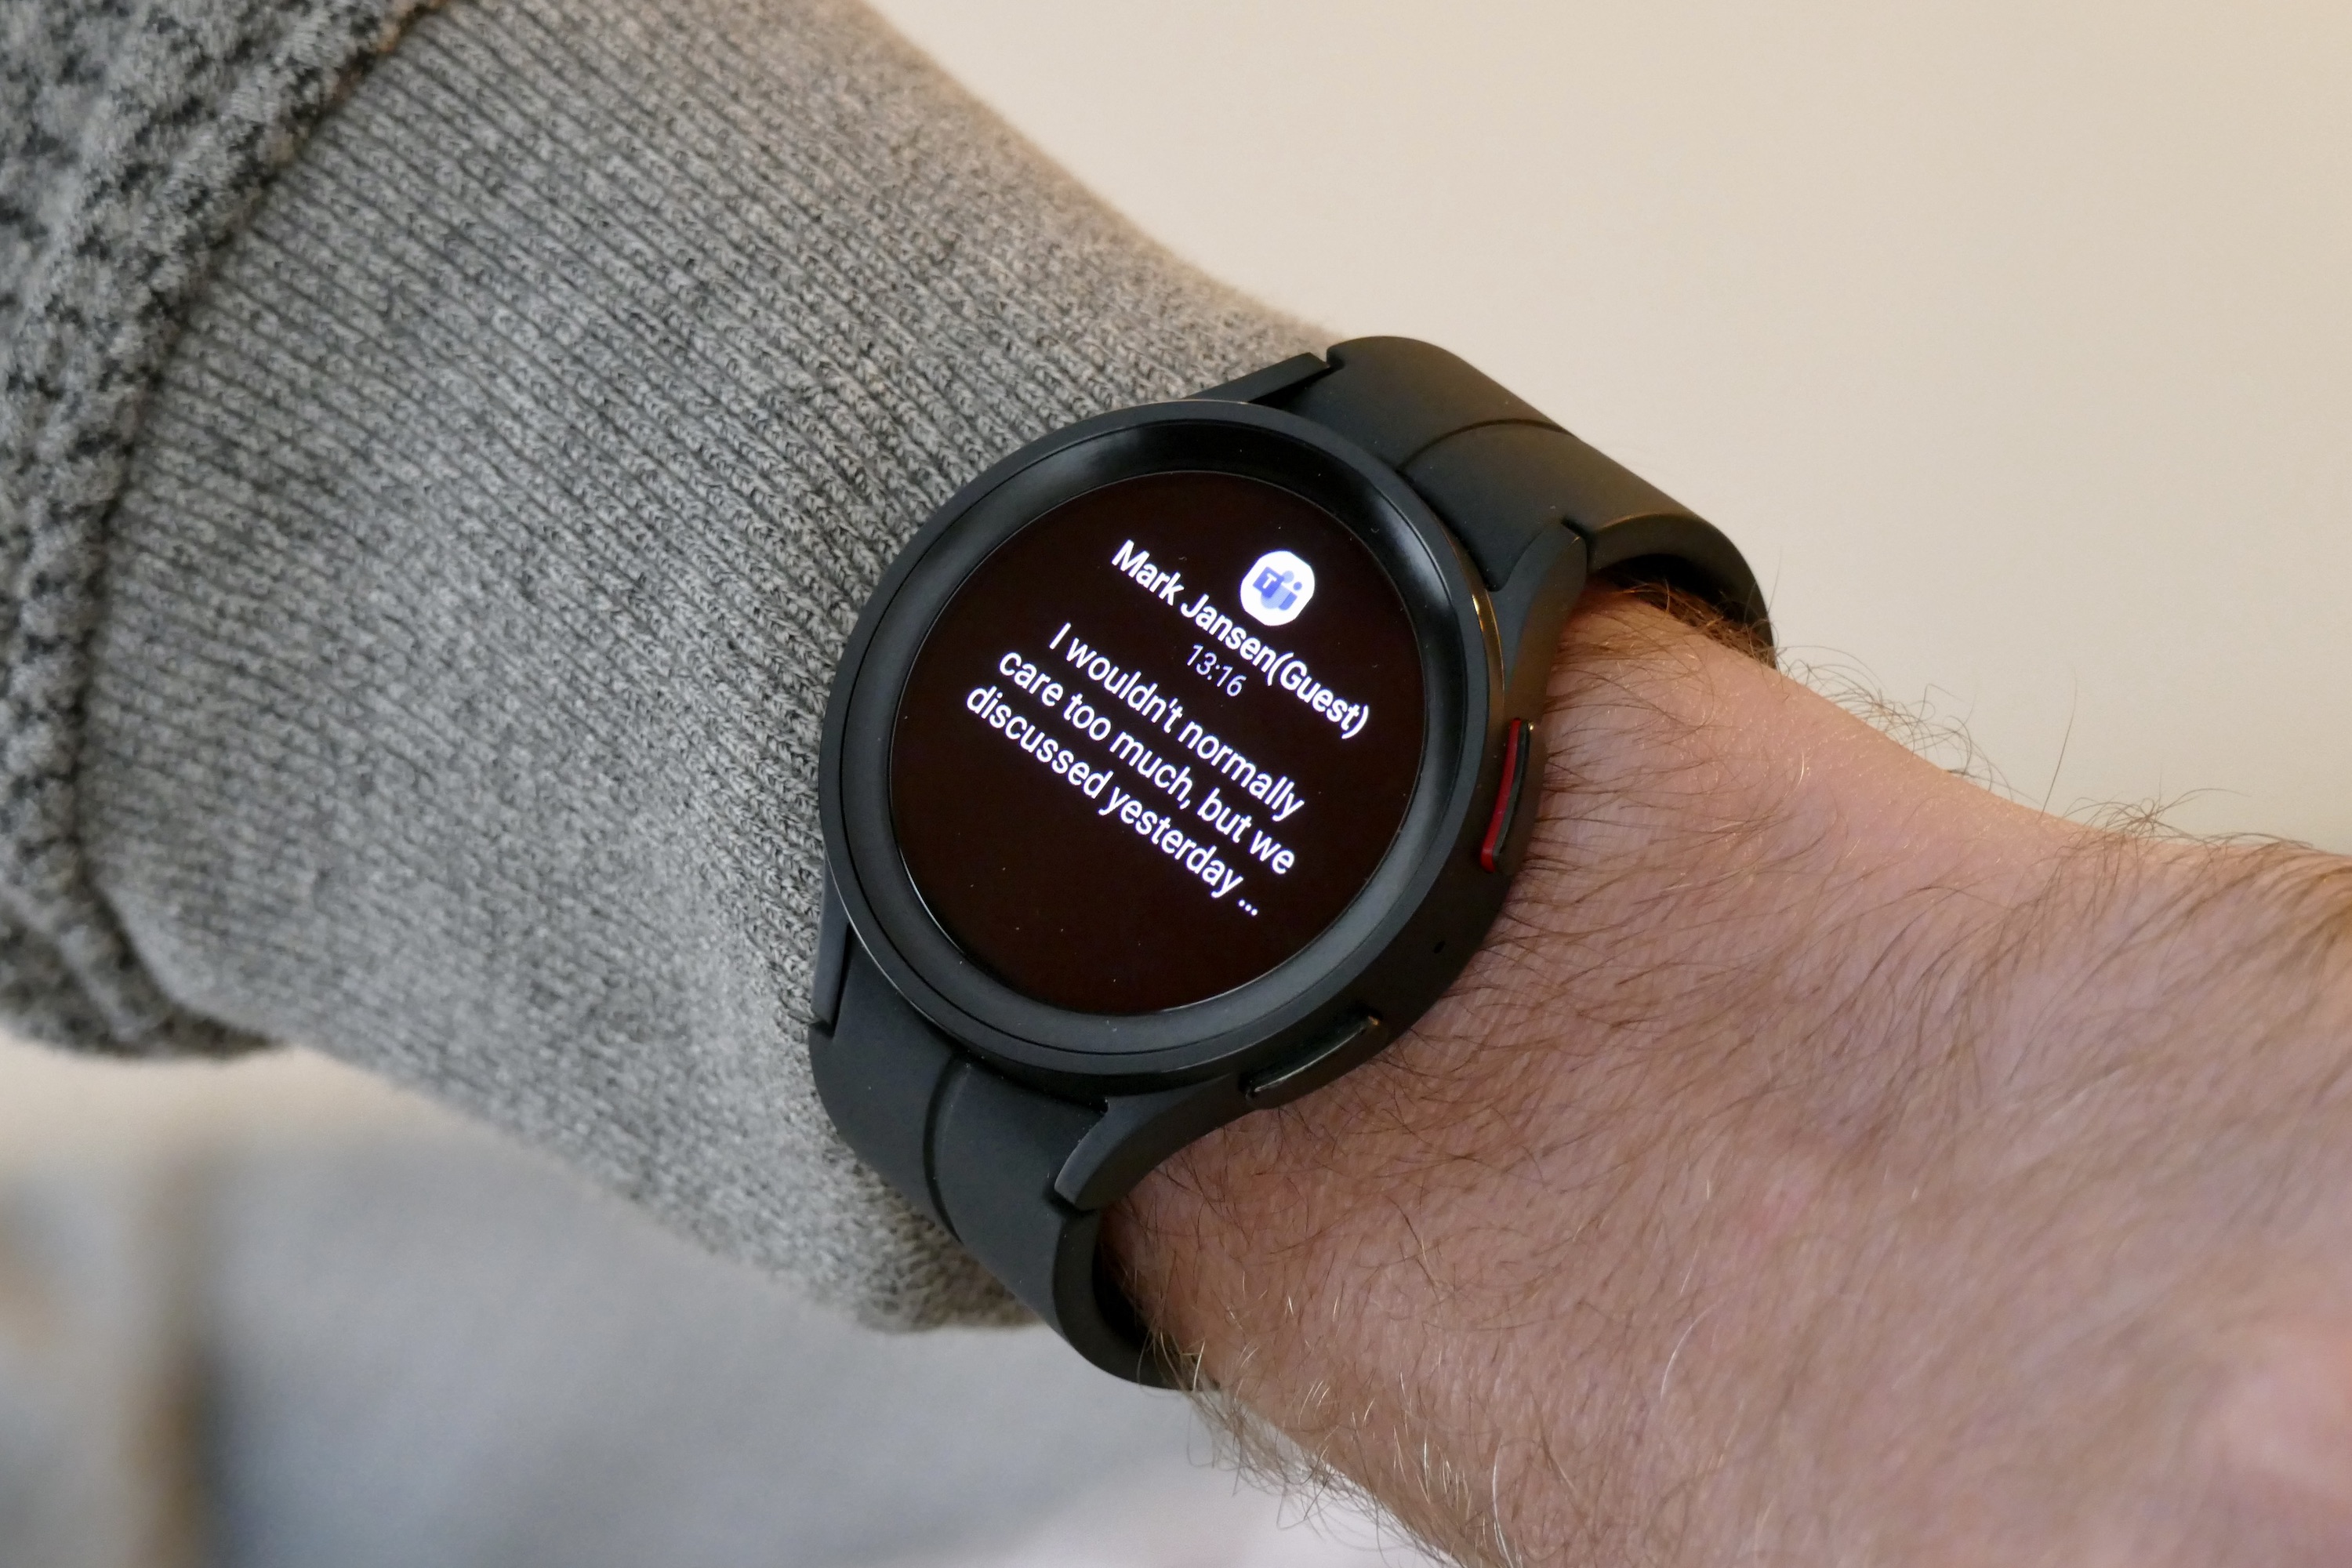 Notifications on the Galaxy Watch 5 Pro.